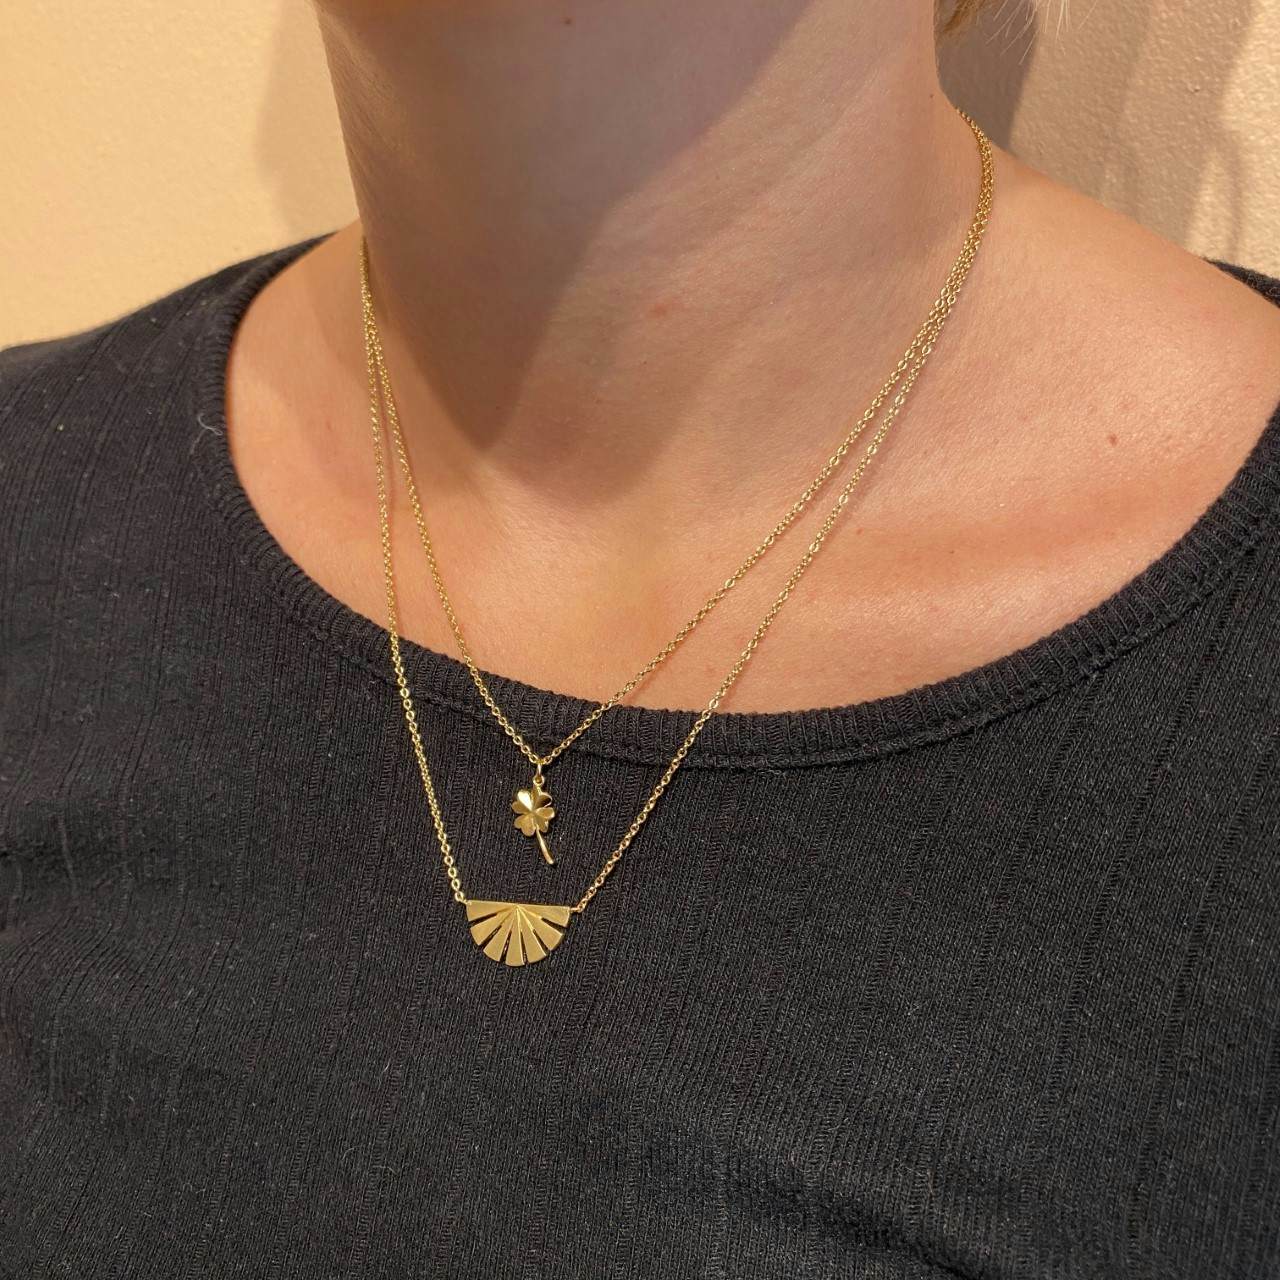 Clover necklace from Pernille Corydon in Goldplated-Silver Sterling 925| Matt,Blank